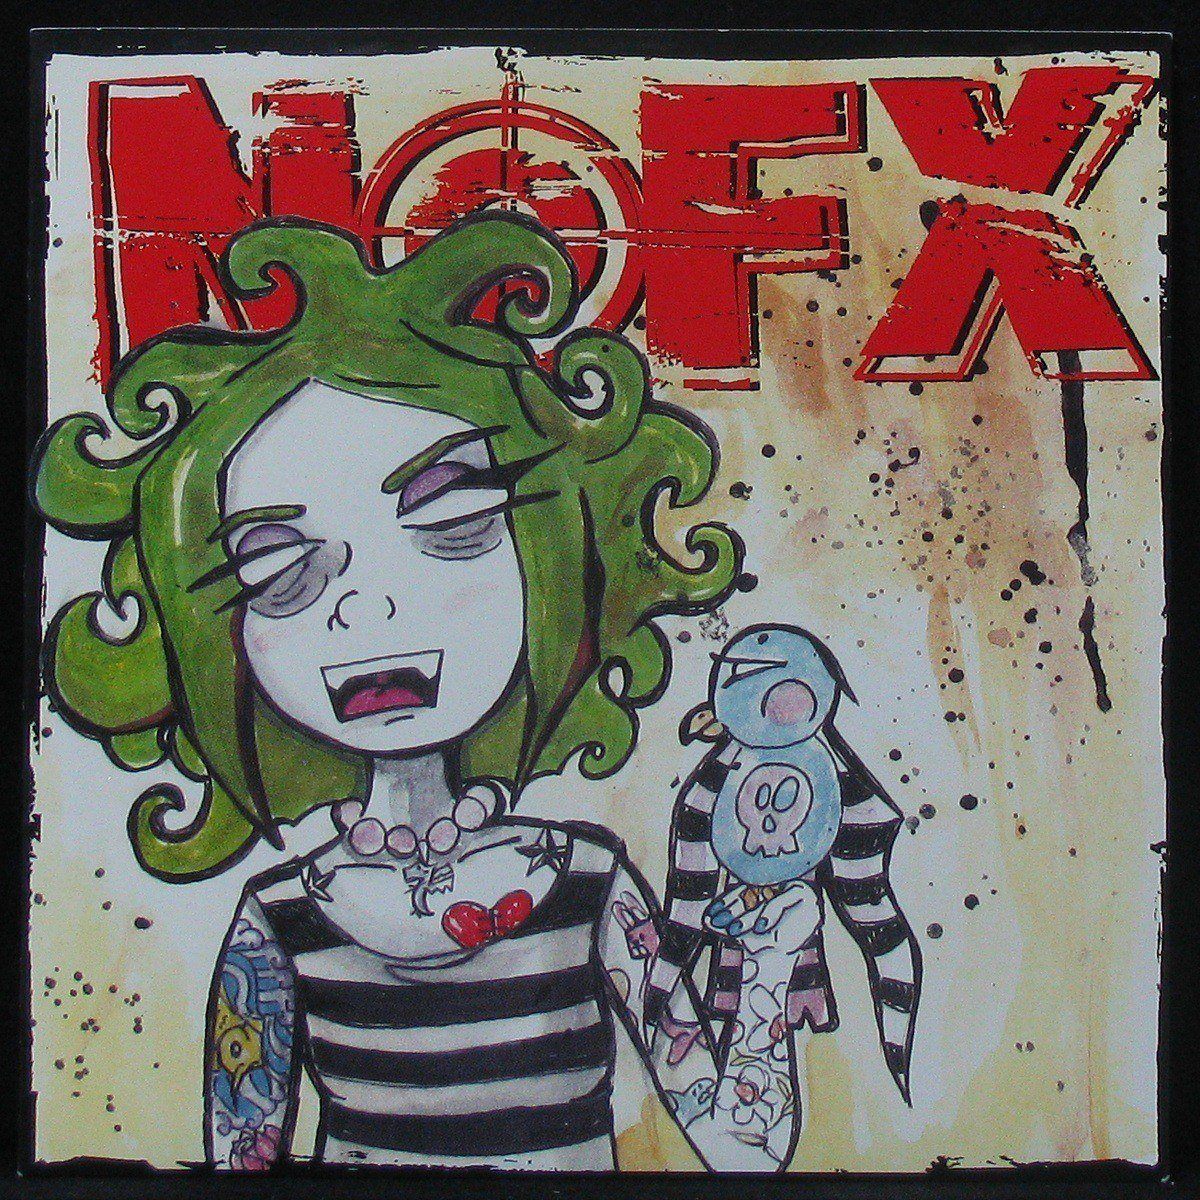 LP Nofx — 7 Inch Of The Month Club #7 (coloured vinyl, single, club edition) фото